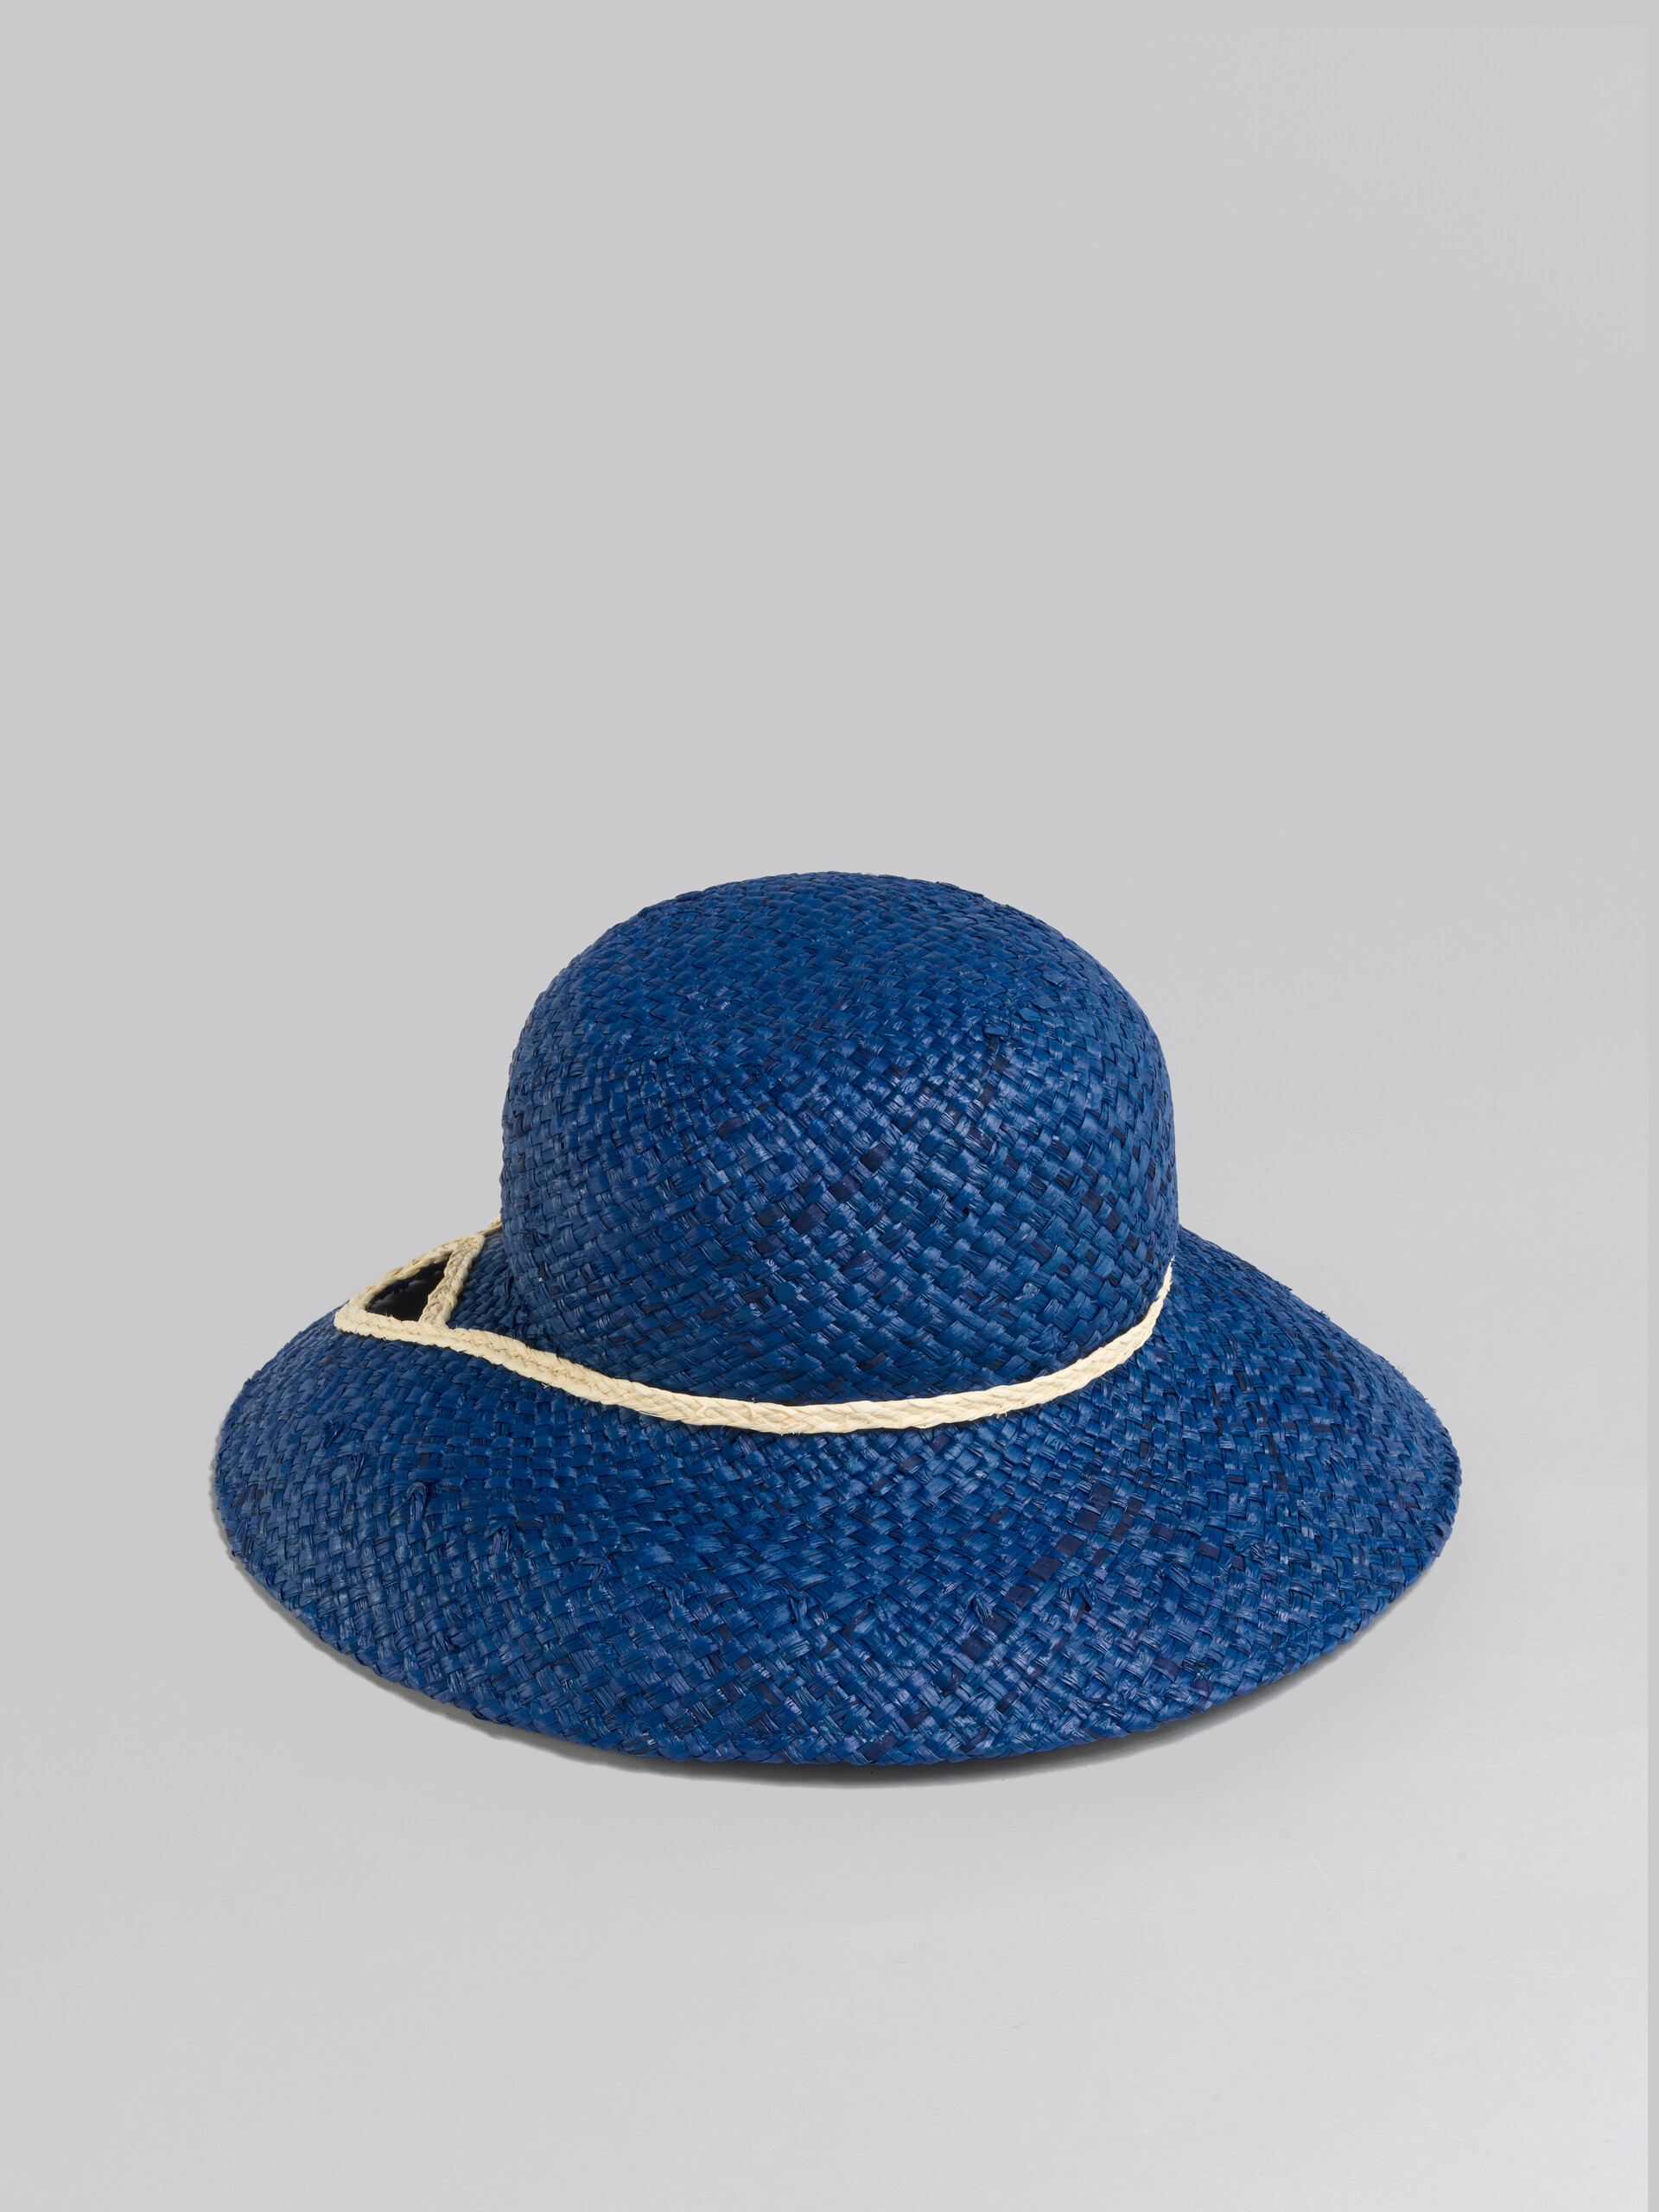 Marni x No Vacancy Inn - Blue hat in raffia with cut-outs - Hats - Image 3